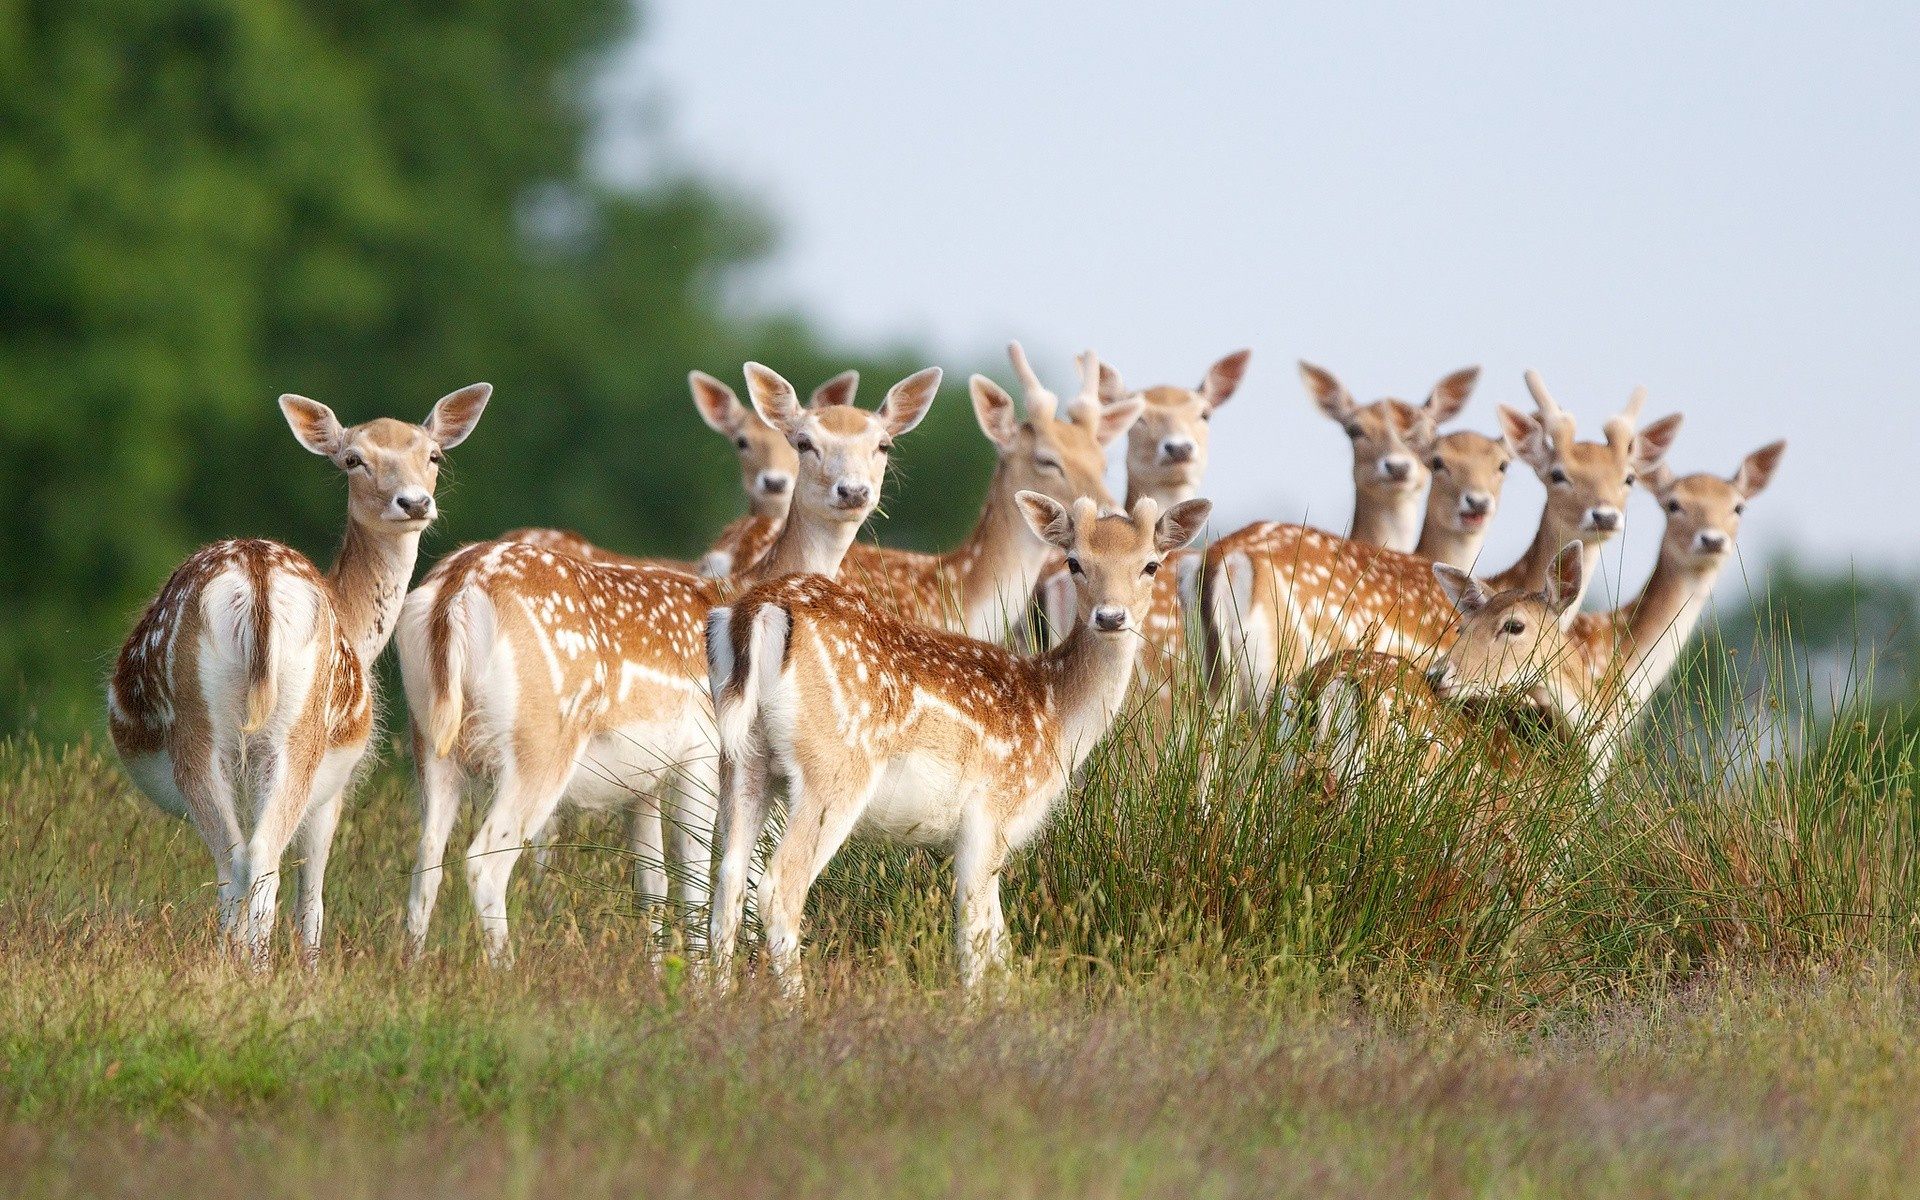 What is a collective group of deer called?